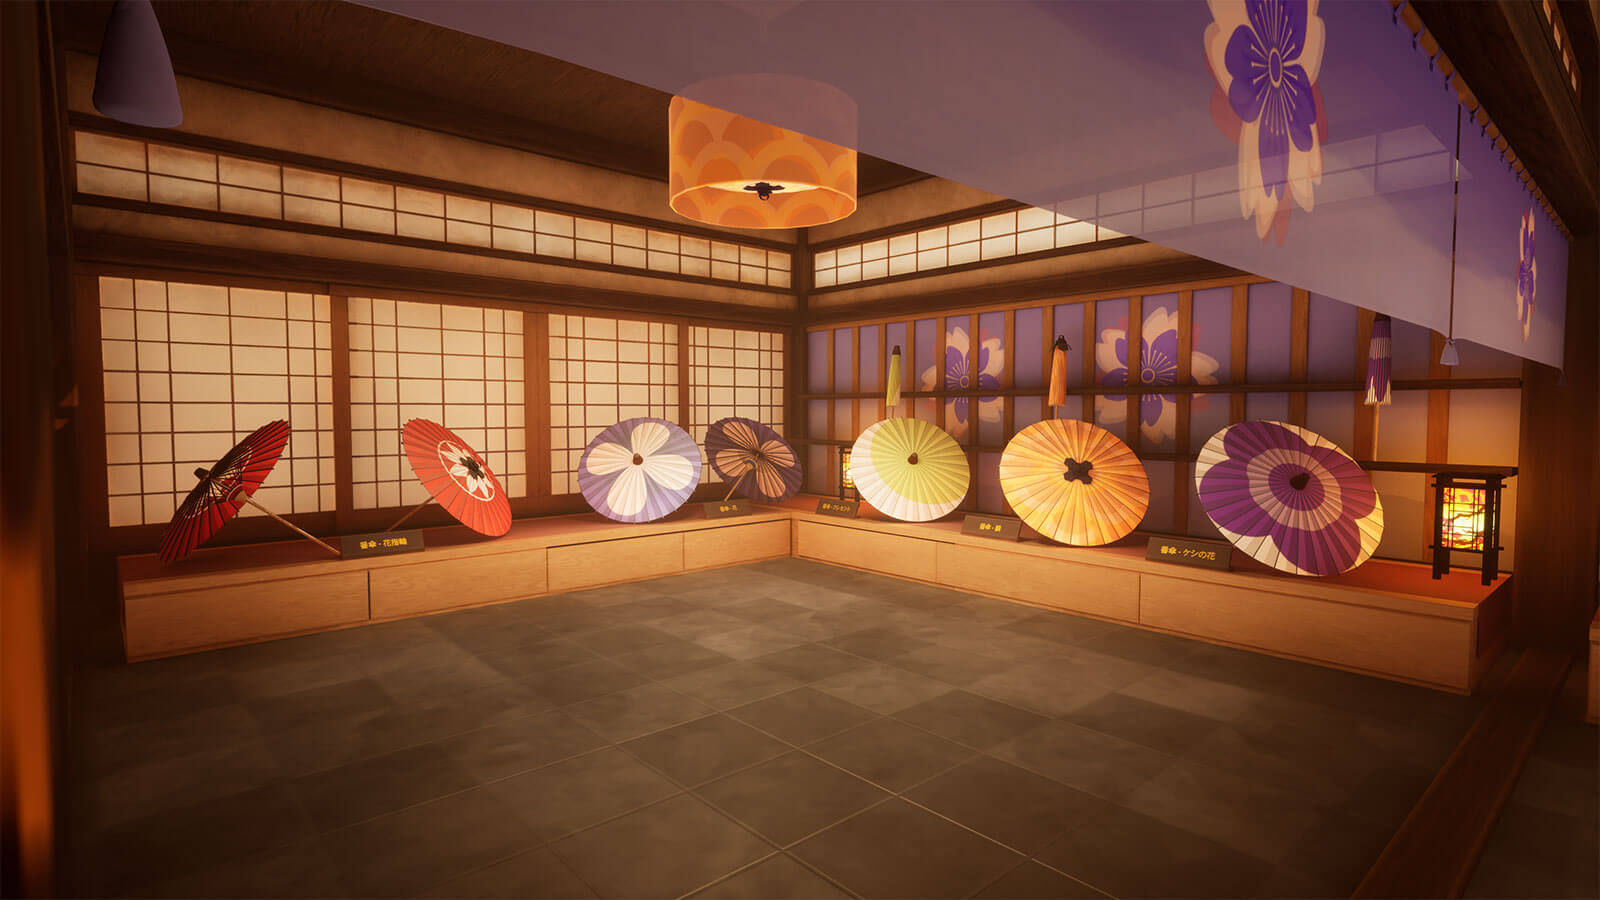 Multiple tranditional Japanese umbrellas line the the perimeter of a room